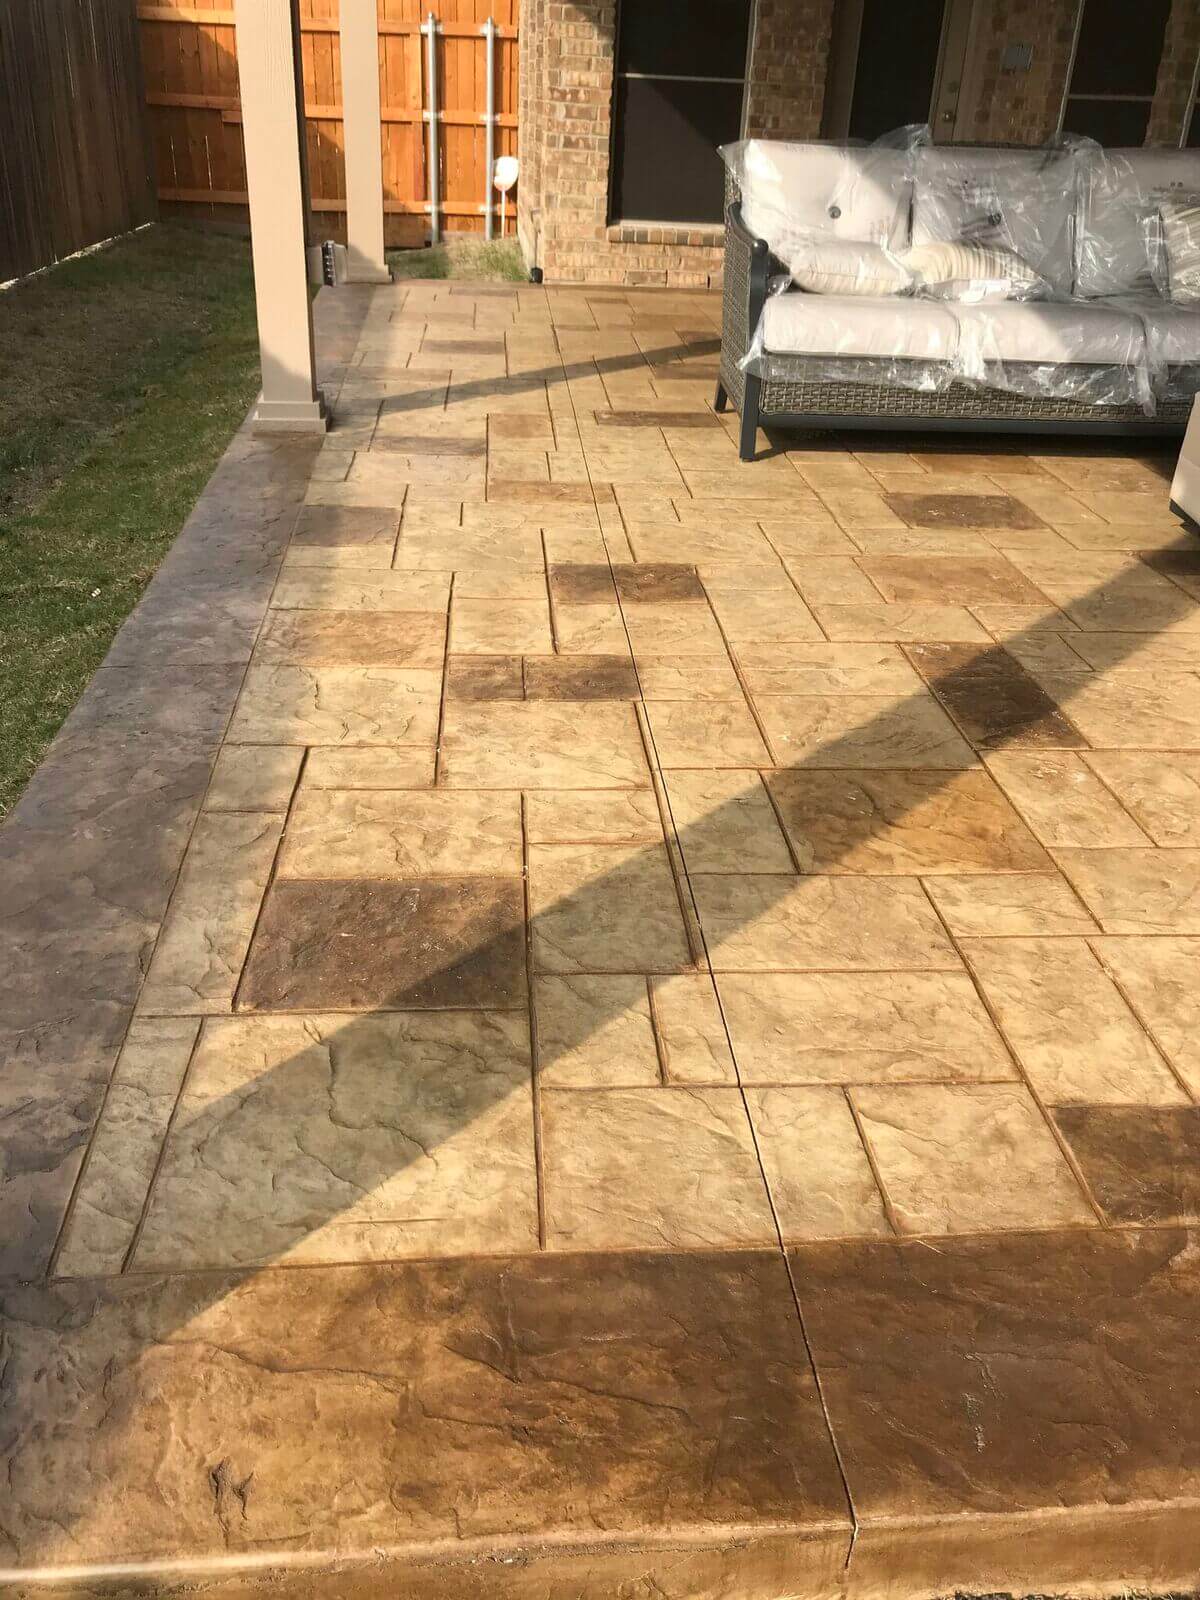 Stained and stamped patio